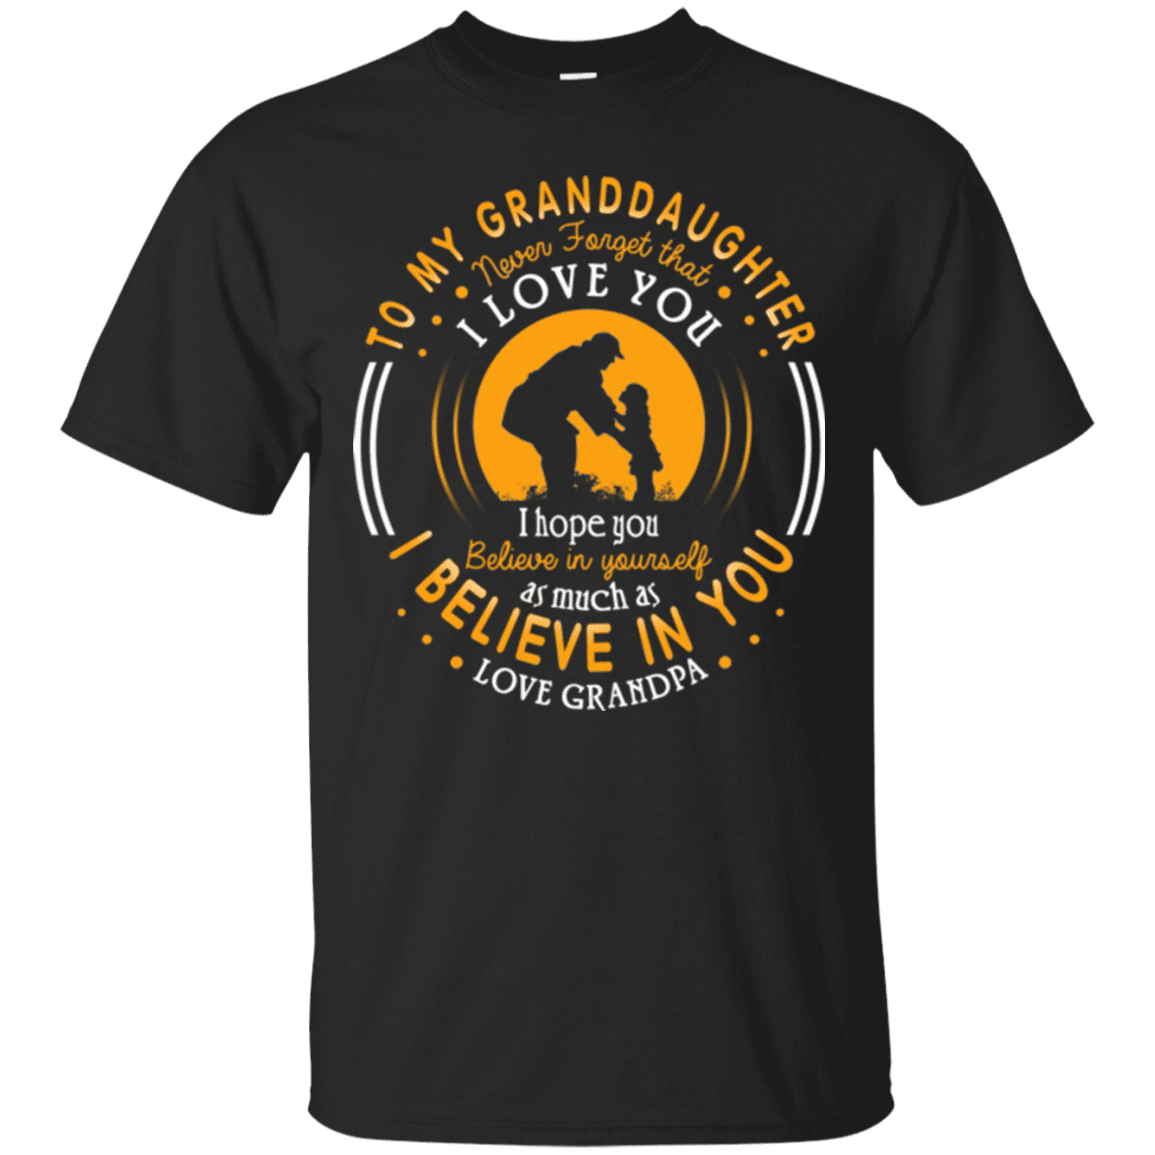 Military T-Shirt "TO MY GRANDDAUGHTER I BELIVE IN YOU"-TShirt-General-Veterans Nation